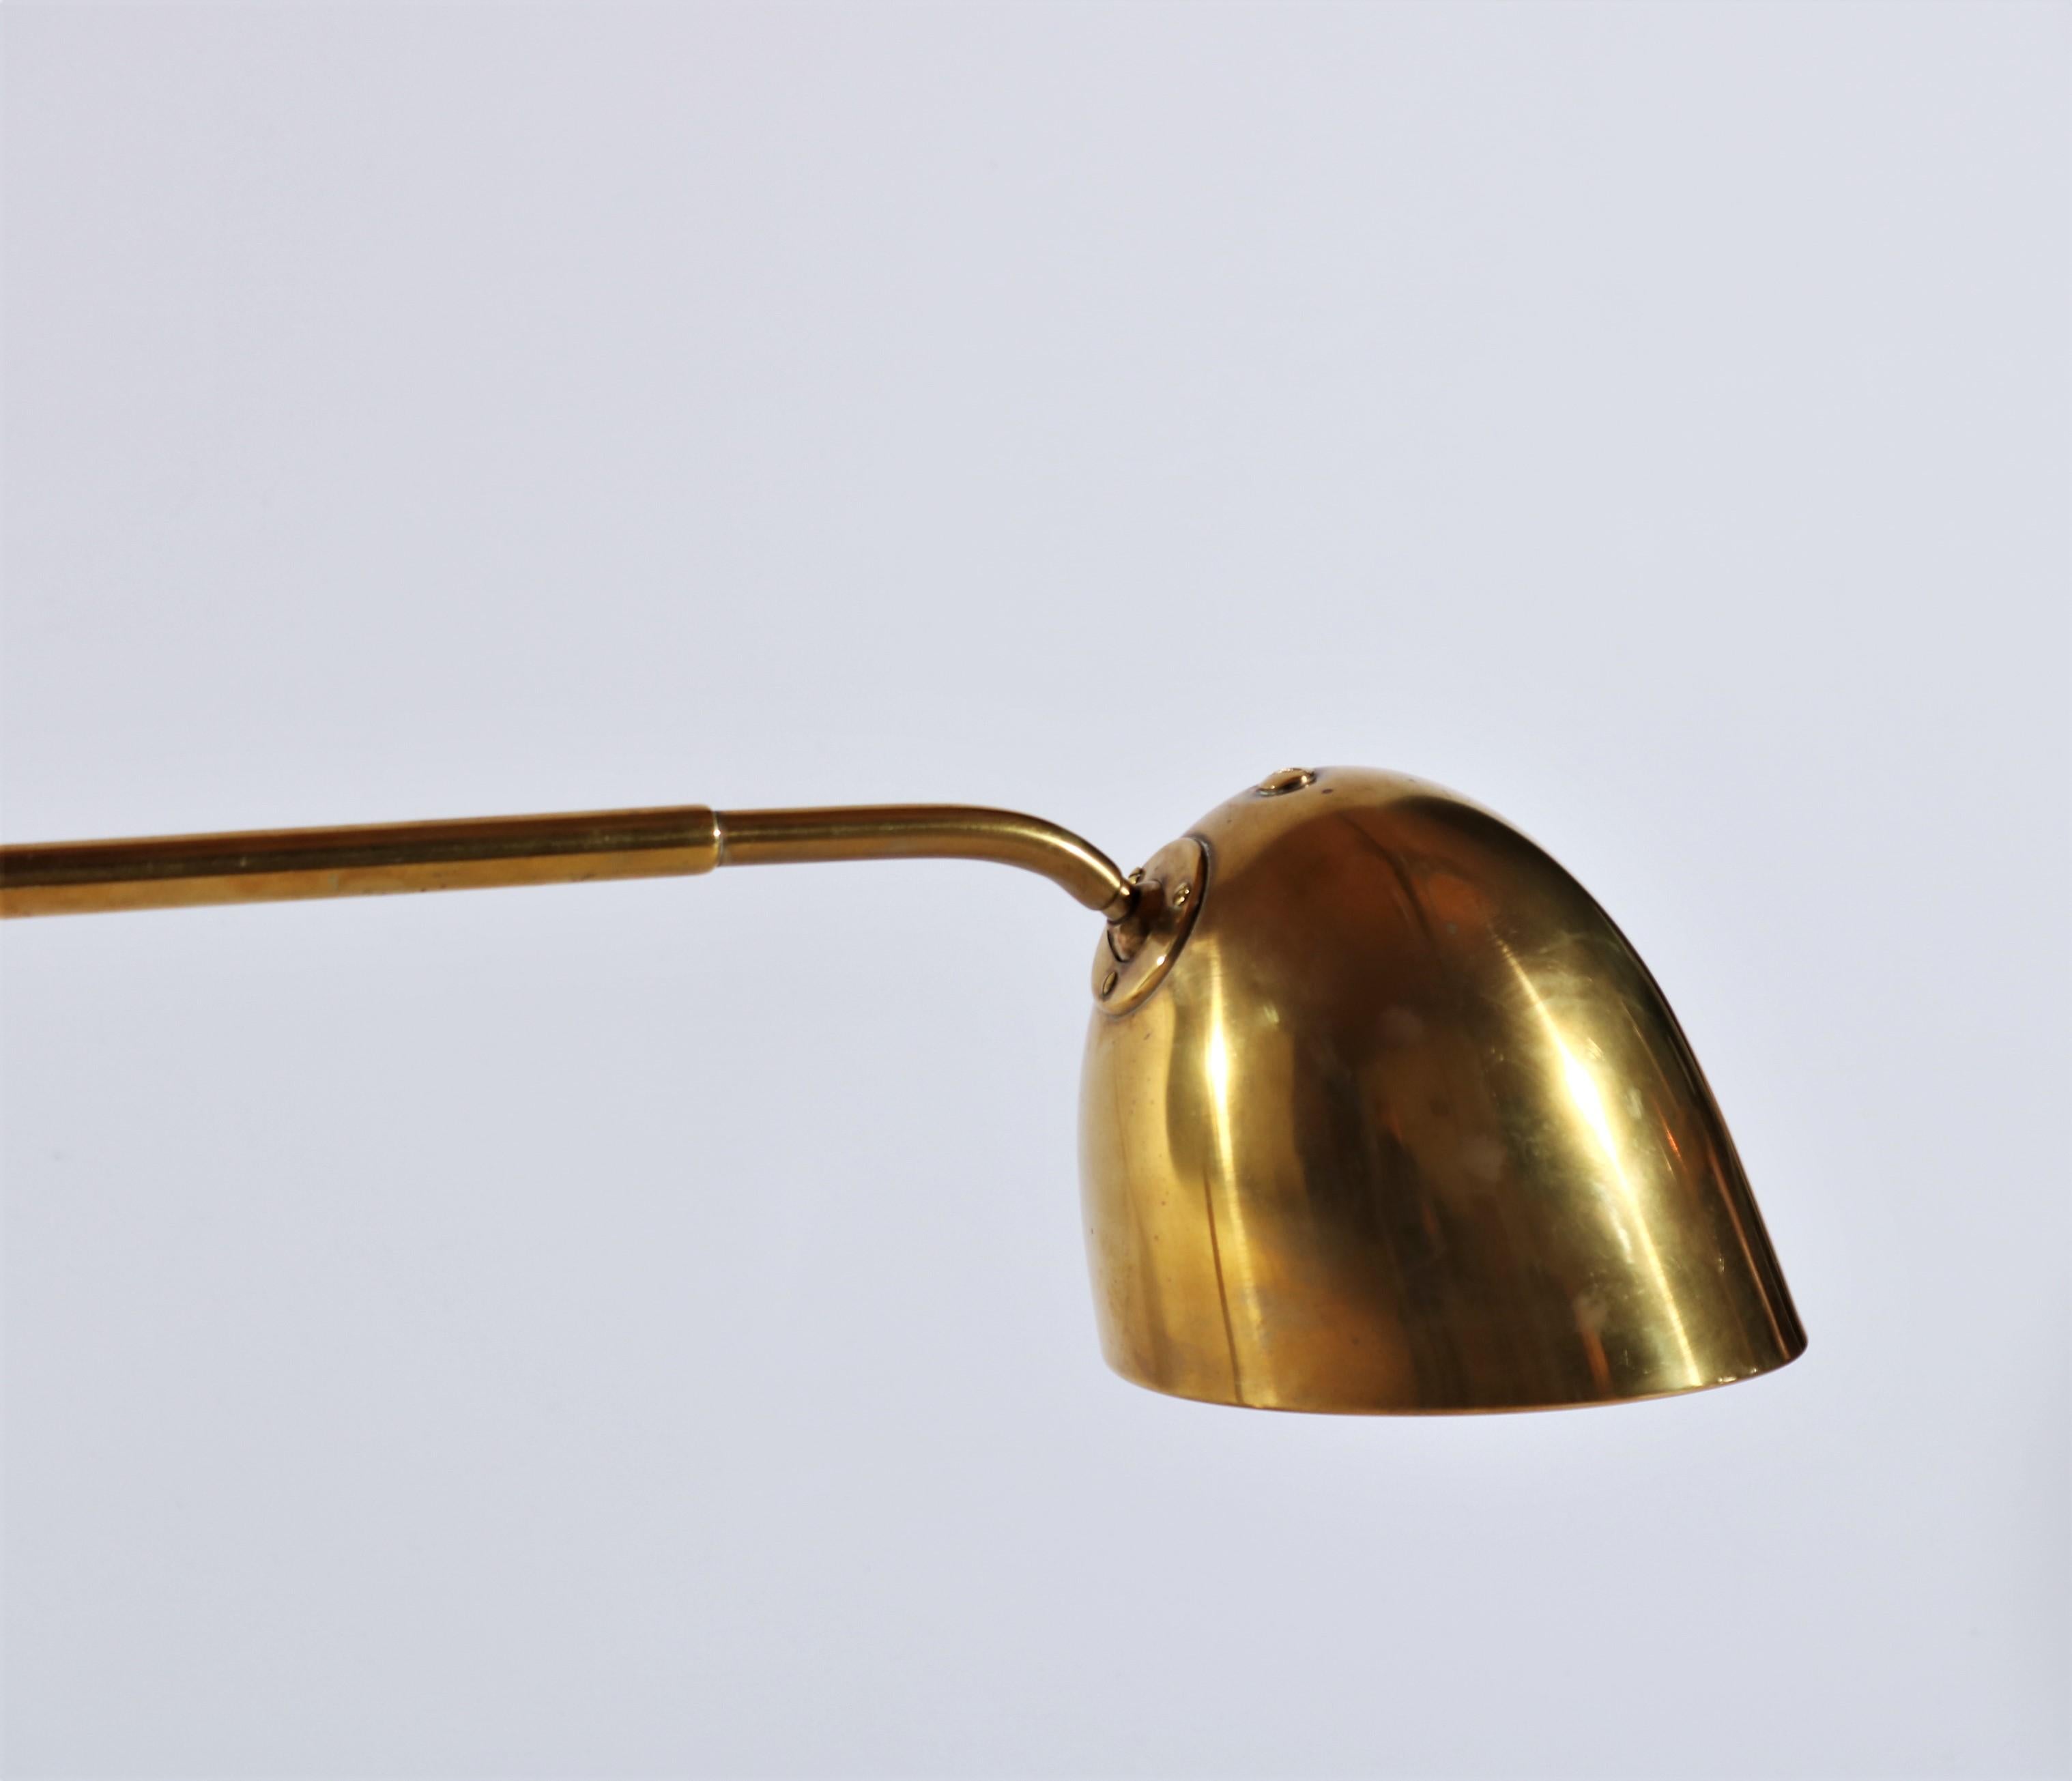 Impressive desk lamp in solid brass with adjustable shades. The lamp is attributed to Danish Architect Vilhelm Lauritzen and was made in the 1940s. Probably manufactured at Louis Poulsen. The lamp has a beautiful patina on the brass and is in great